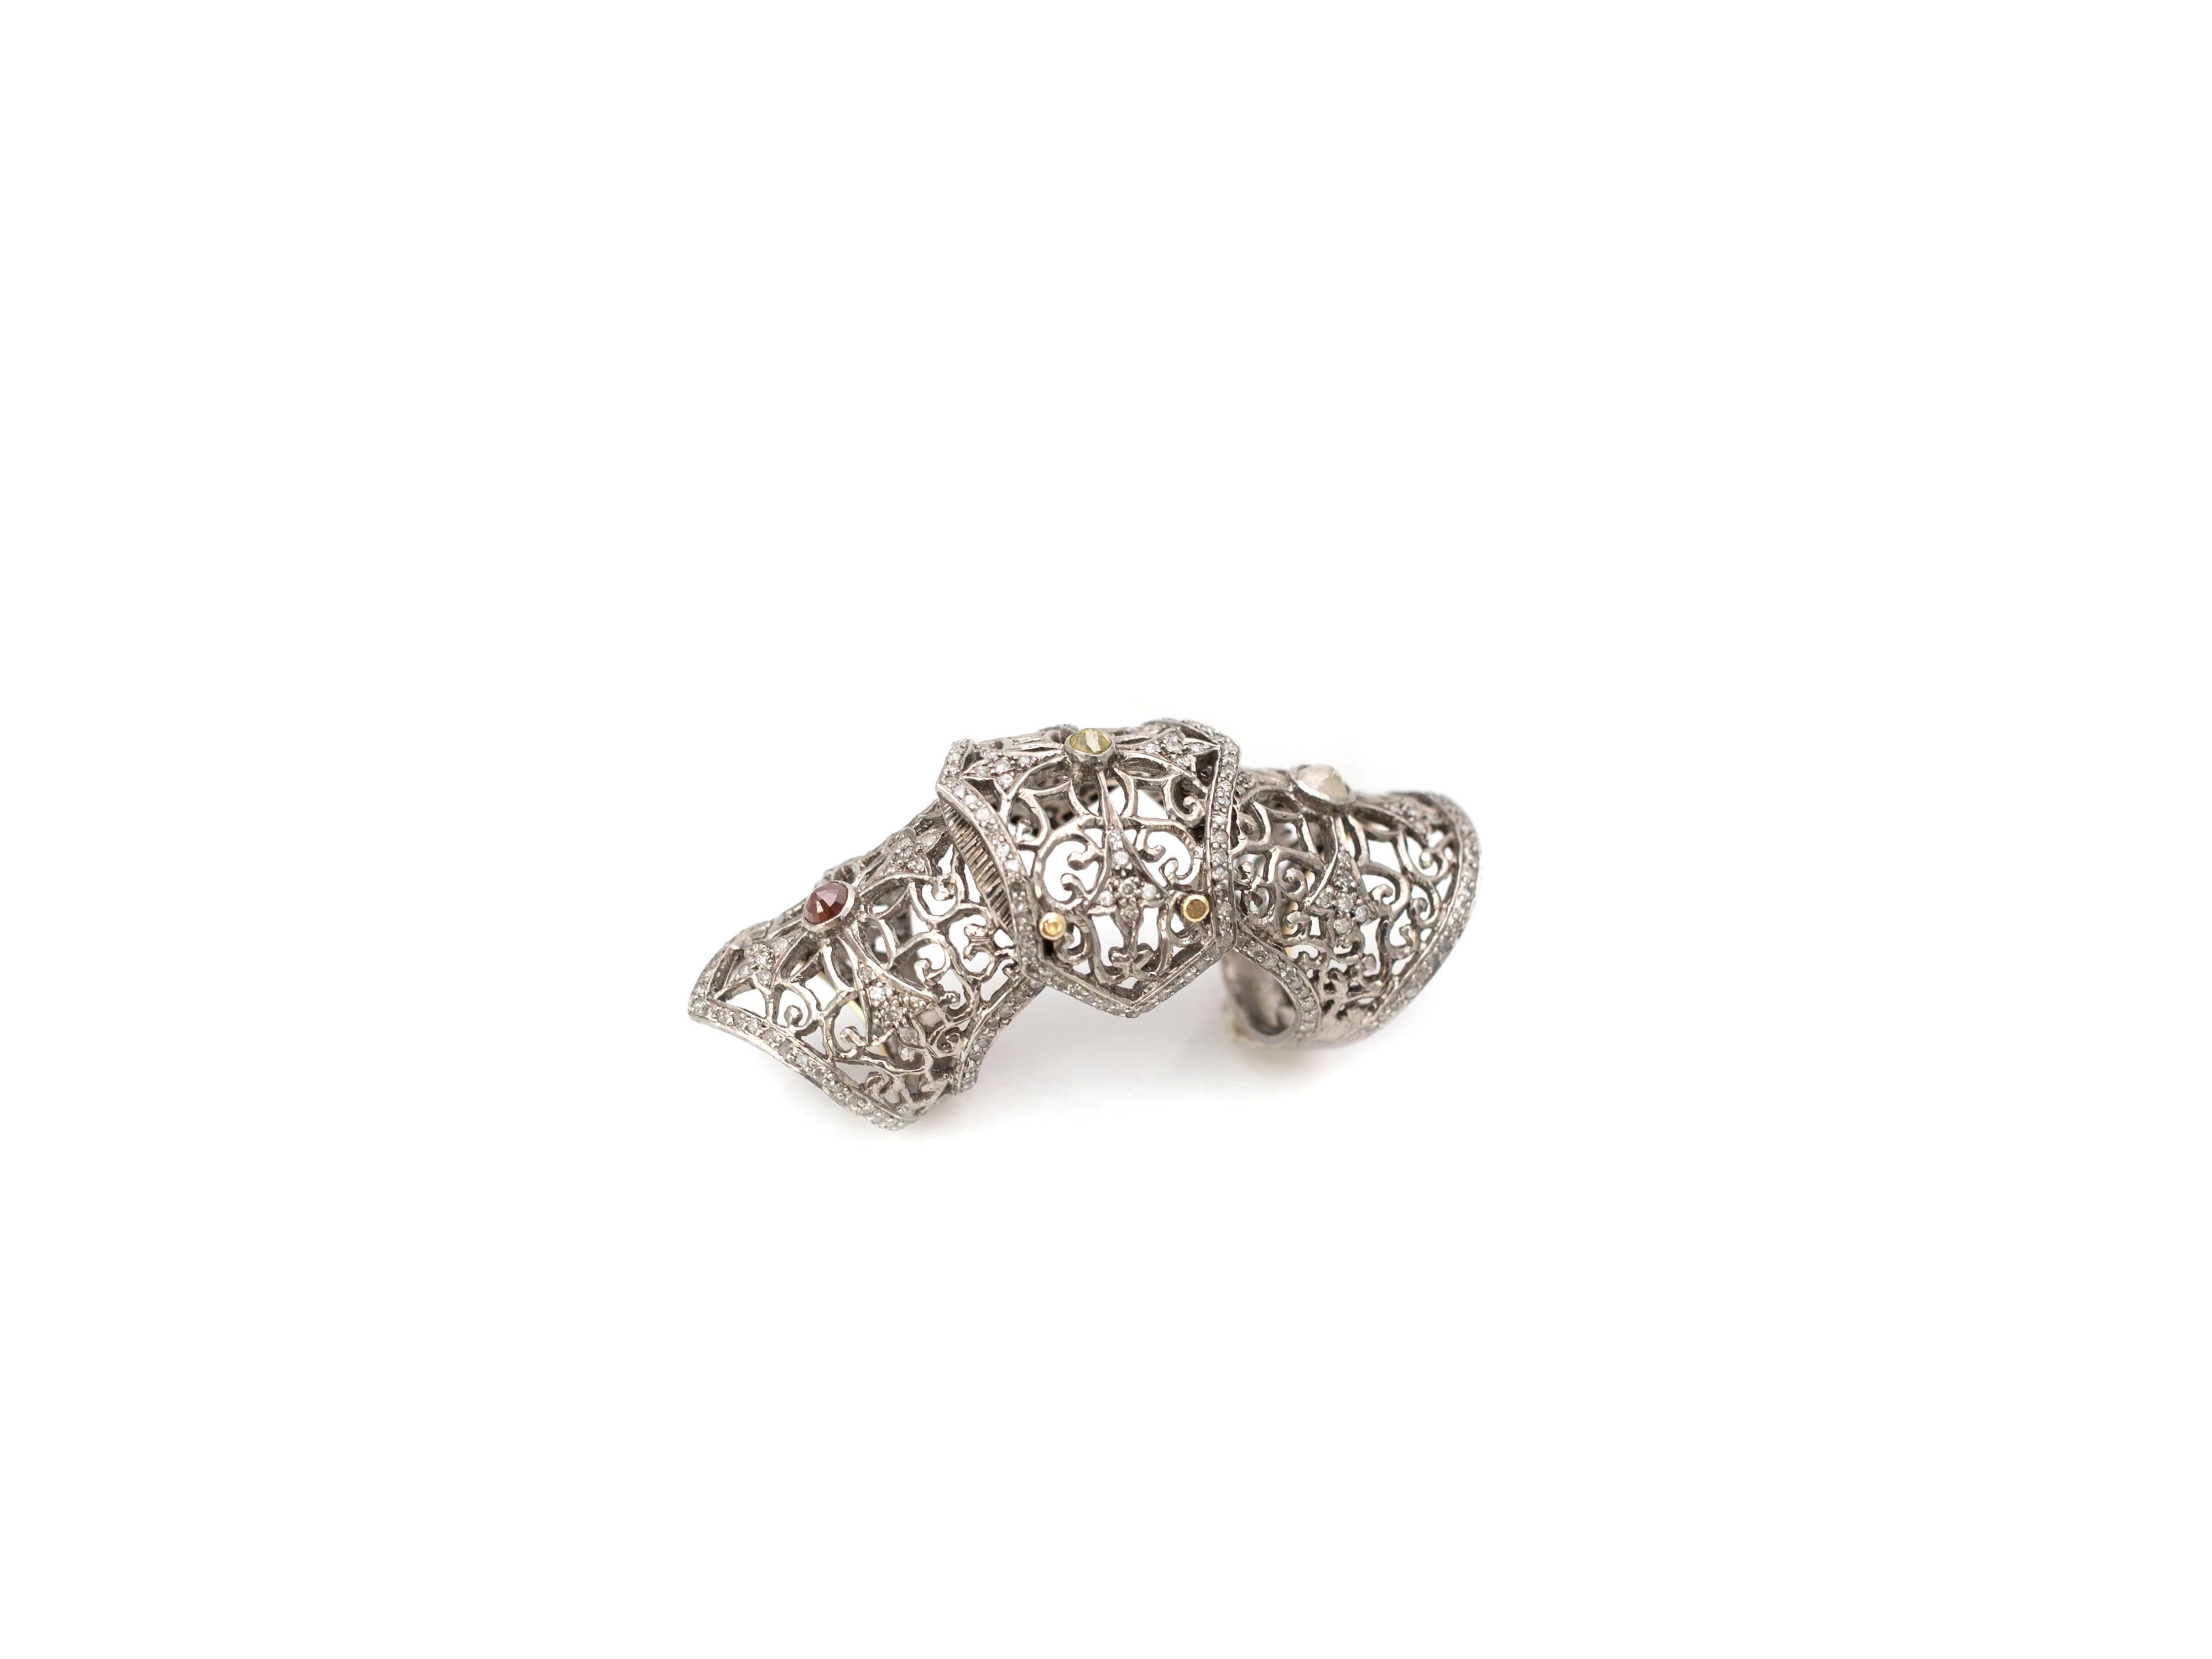 The diamond Knight Armor Ring by designer Samira13 utitlizes pave diamonds for modernity and rose cuts for a touch of Old World charm. The ring contains 3.5 carats of champagne diamonds set in sterling silver. Ring Size 6.5.
